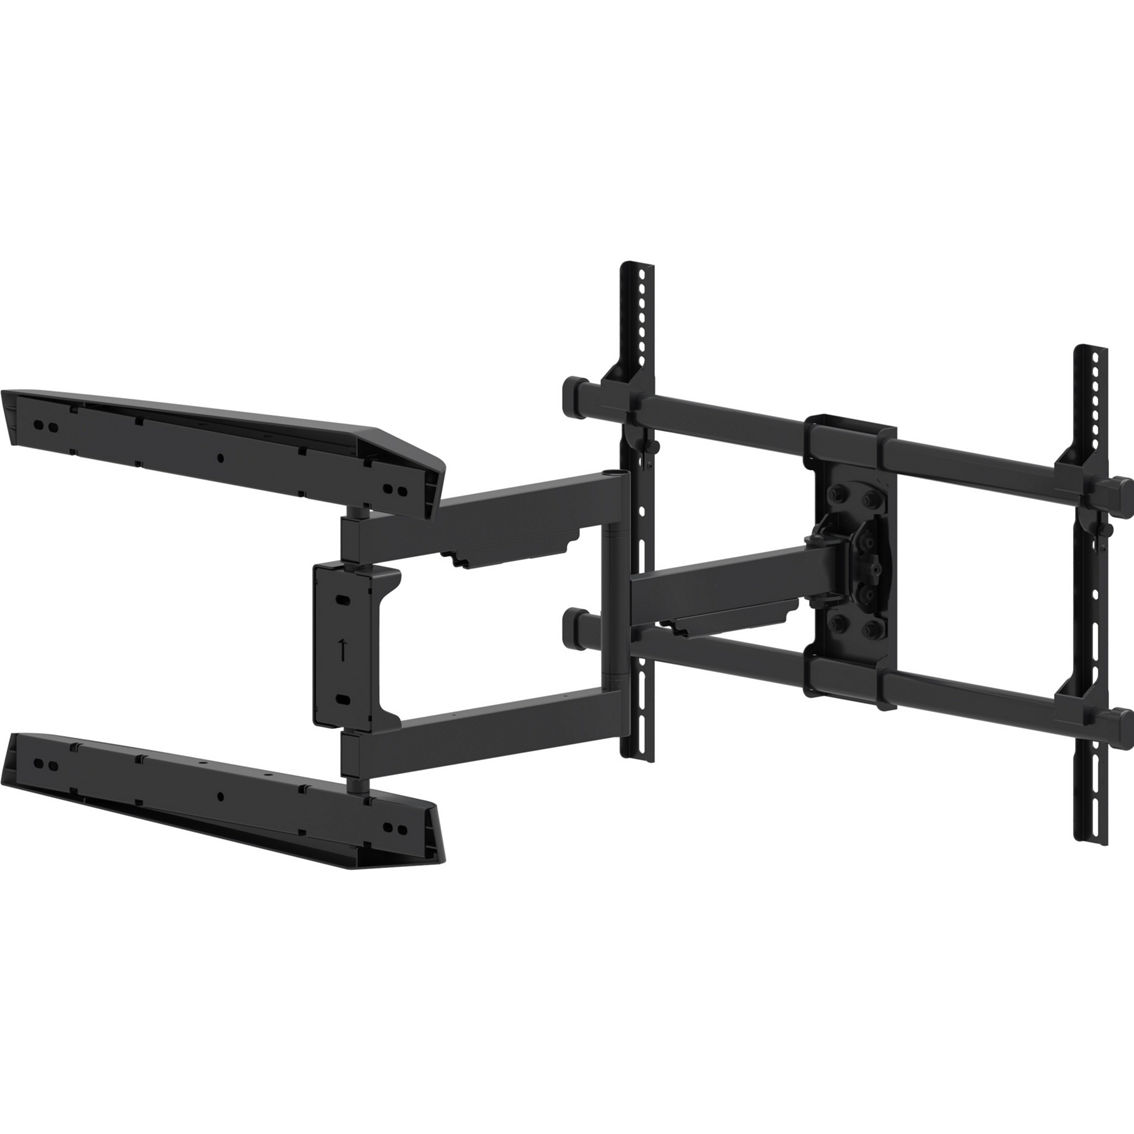 ProMounts FSA64 Articulating Wall Mount for 42 to 70 in. Screens - Image 9 of 9